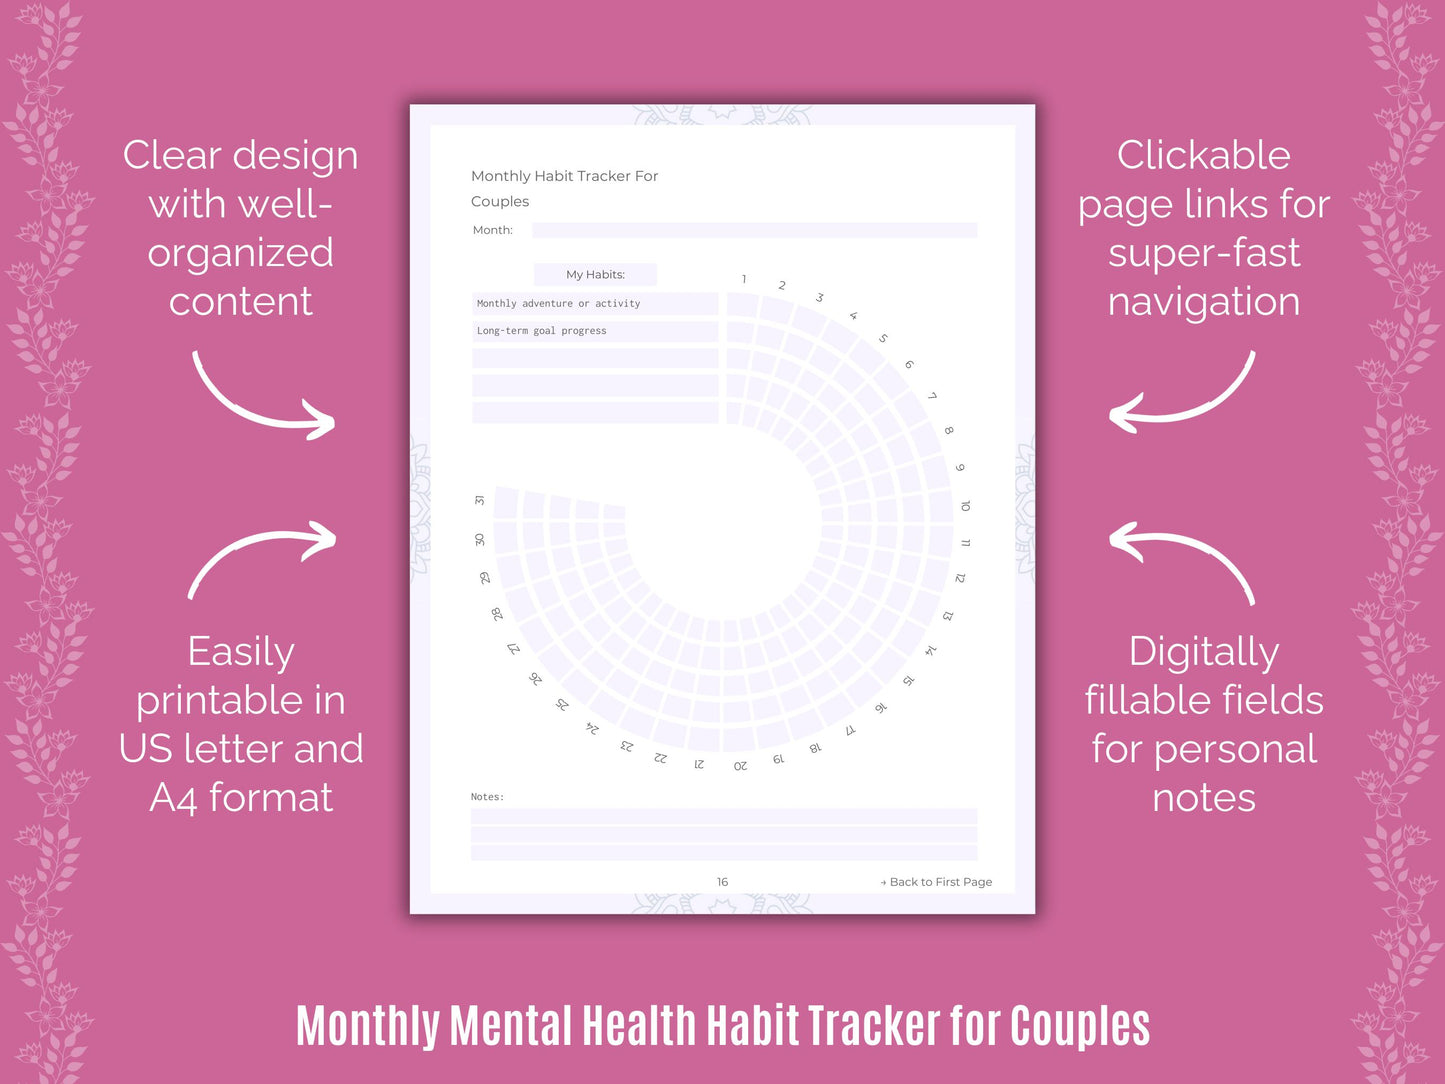 Couples Mental Health, Couples Workbooks, Couples Journals, Couples Notes, Couples Tools, Couples Counseling, Couples Planners, Couples Resources, Couples Journaling, Couples Templates, Couples Goal Setting, Couples Therapy, Couples Cheat Sheet